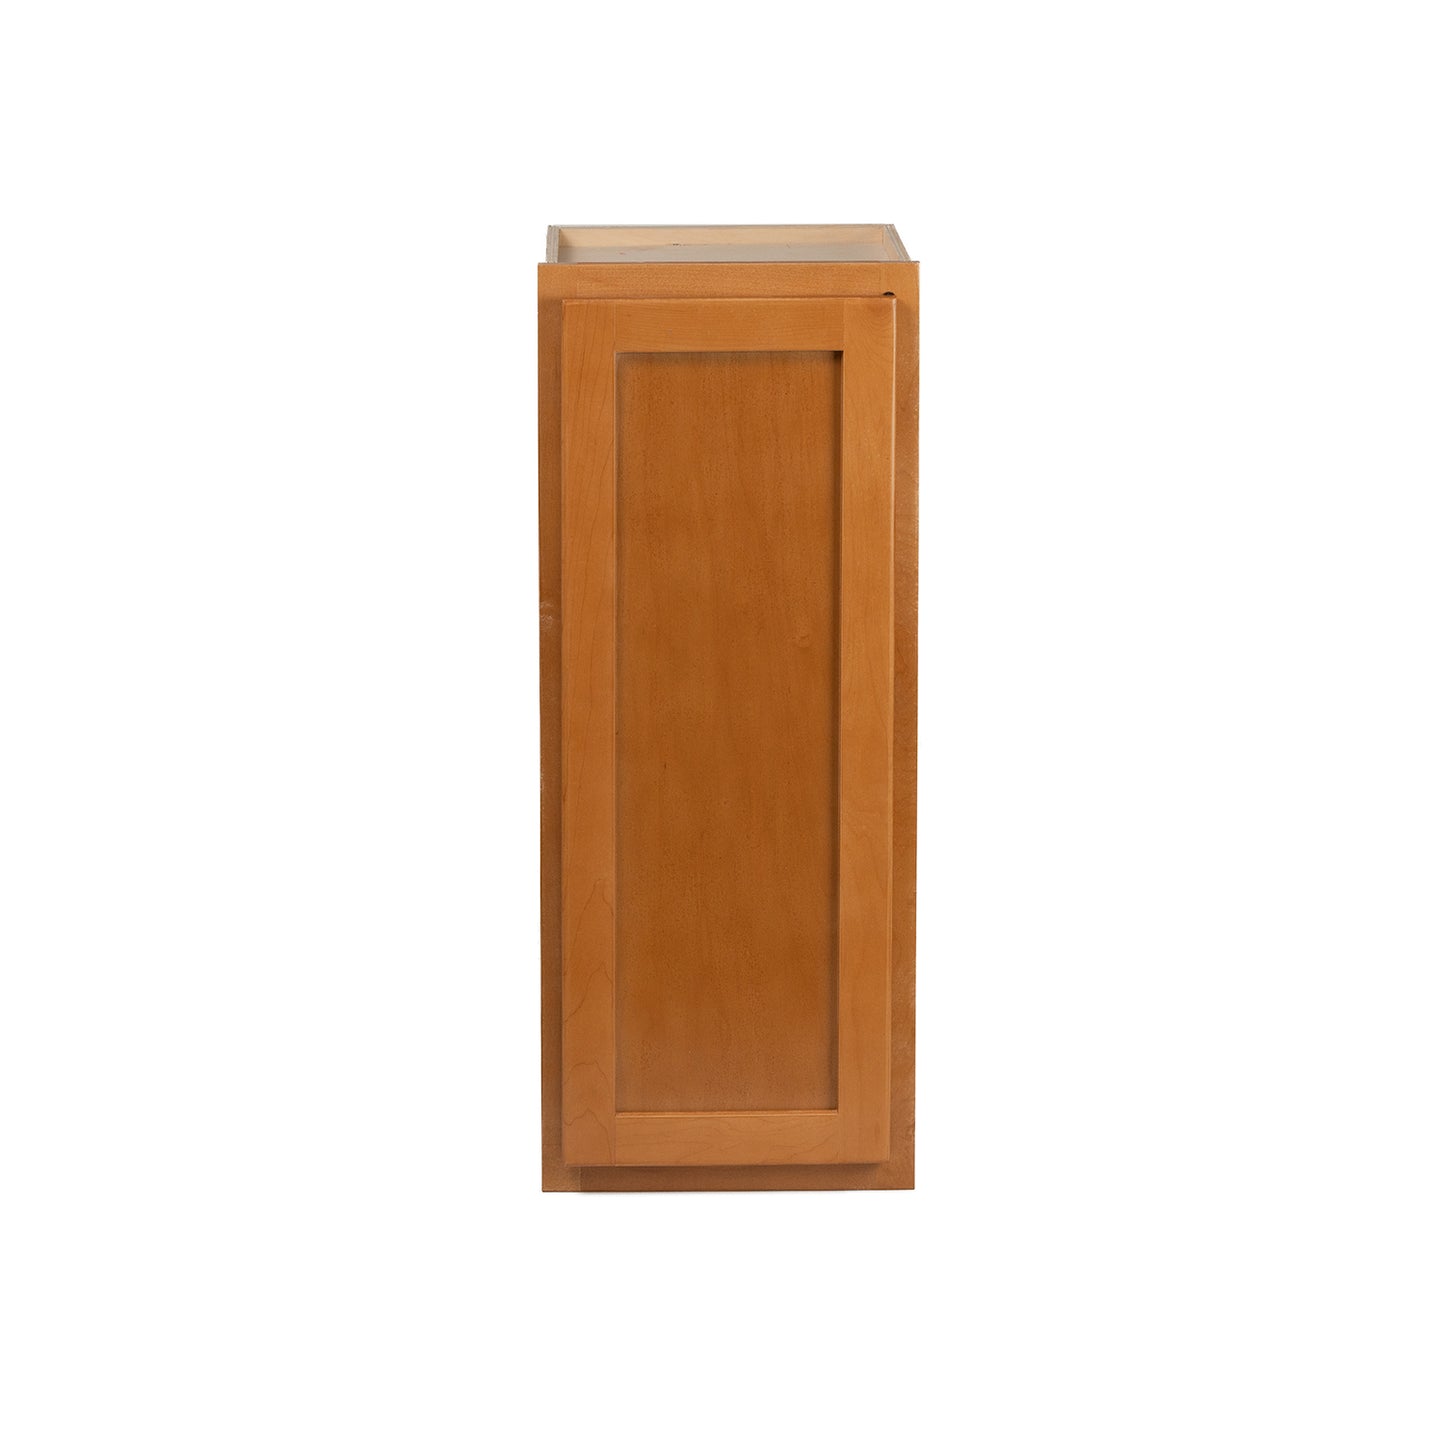 Quicklock RTA (Ready-to-Assemble) Provincial Stain 21"Wx36"Hx12"D Wall Cabinet